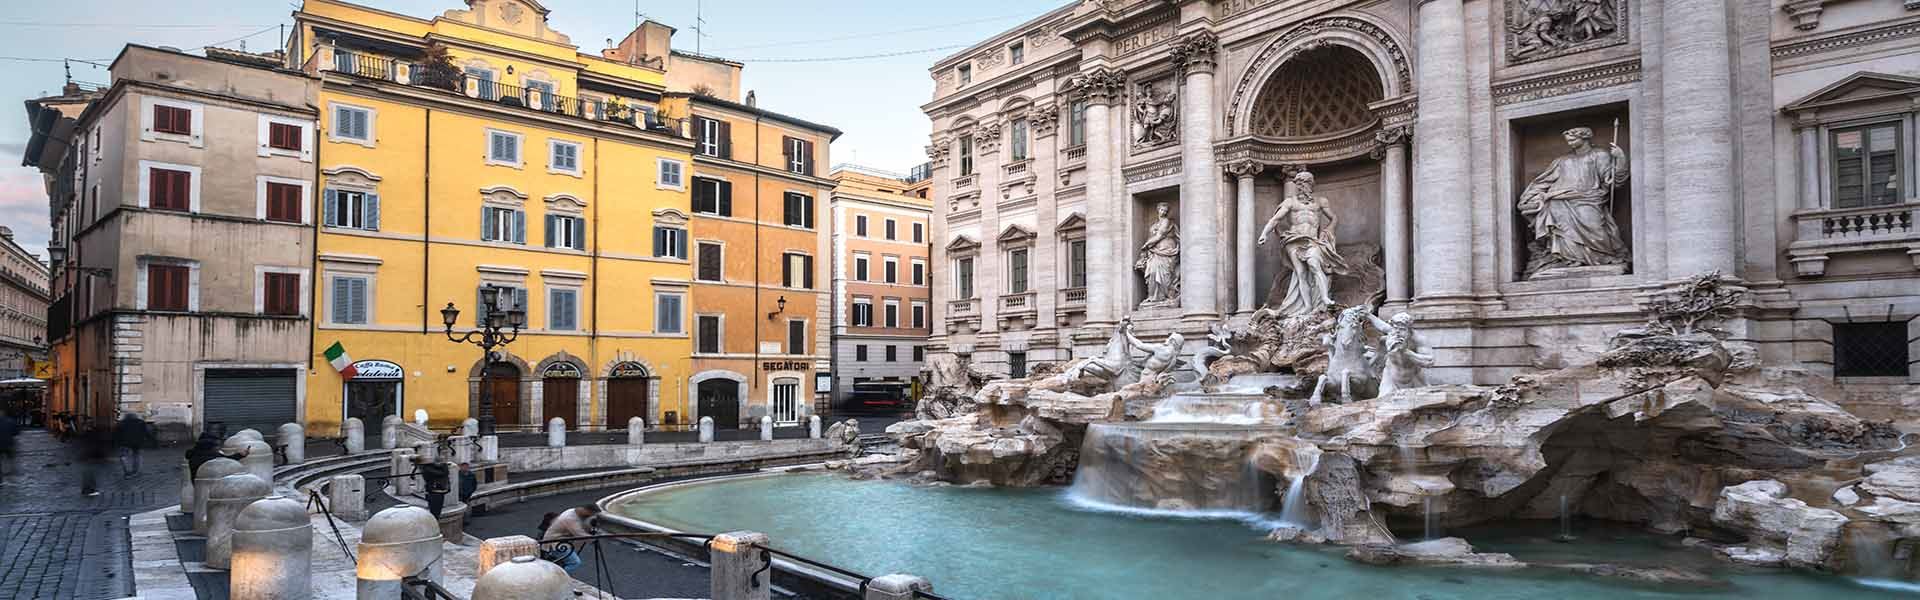 Side view of the Trevi Fountain. To the right, one can see the crystal-clear blue water fountain, and, just behind it, Palazzo Poli and its stonework. There are several orange-hued buildings to the left.